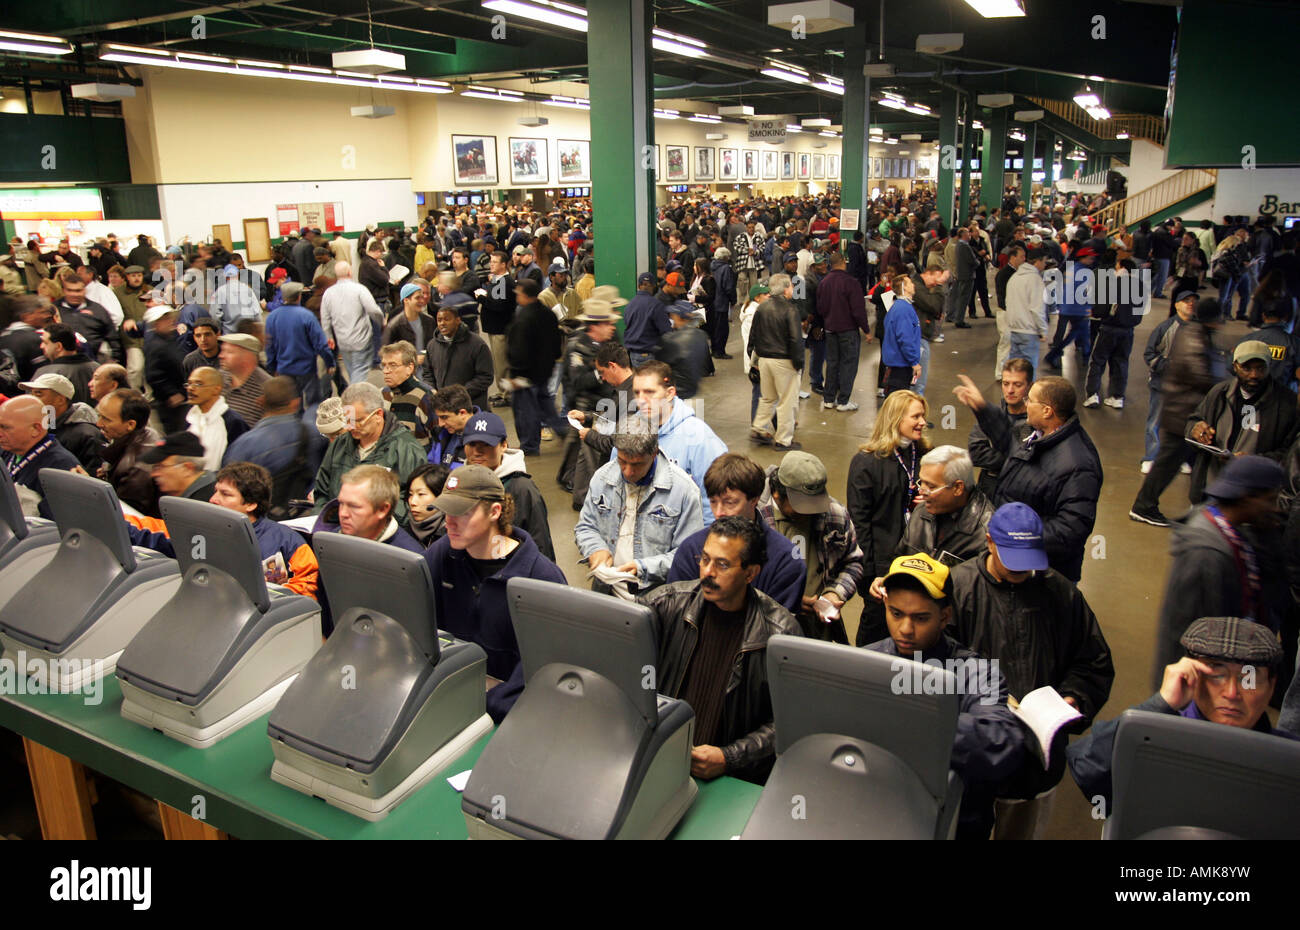 People at the betting hall at the Belmont Park race course, New York, USA Stock Photo